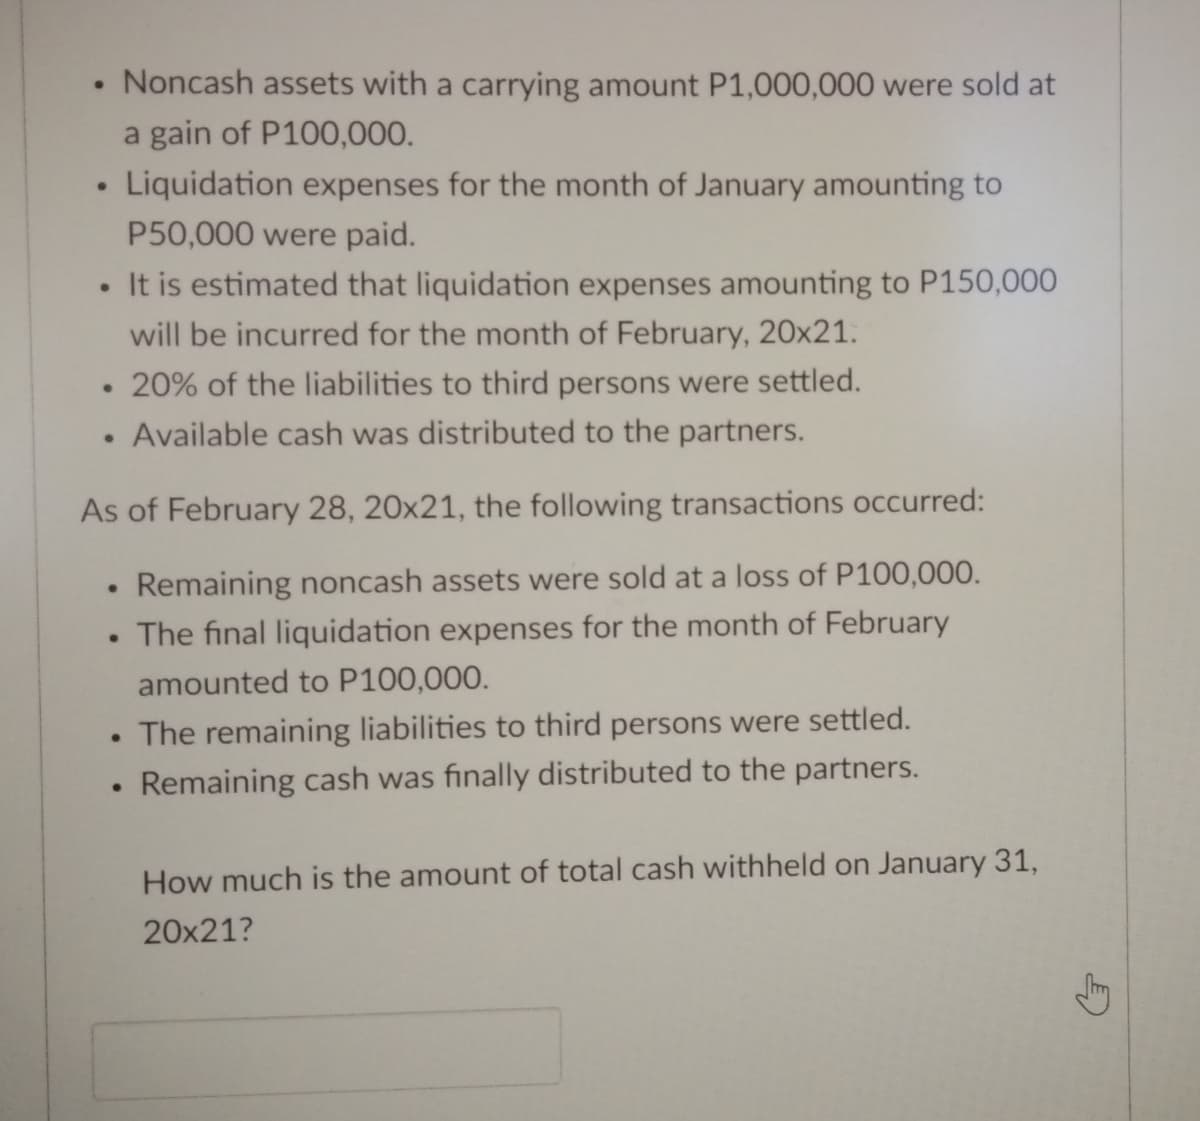 Noncash assets with a carrying amount P1,000,000 were sold at
a gain of P100,000.
Liquidation expenses for the month of January amounting to
P50,000 were paid.
It is estimated that liquidation expenses amounting to P150,000
will be incurred for the month of February, 20x21.
• 20% of the liabilities to third persons were settled.
Available cash was distributed to the partners.
As of February 28, 20x21, the following transactions occurred:
Remaining noncash assets were sold at a loss of P100,000.
• The final liquidation expenses for the month of February
amounted to P100,000.
The remaining liabilities to third persons were settled.
Remaining cash was finally distributed to the partners.
How much is the amount of total cash withheld on January 31,
20x21?
